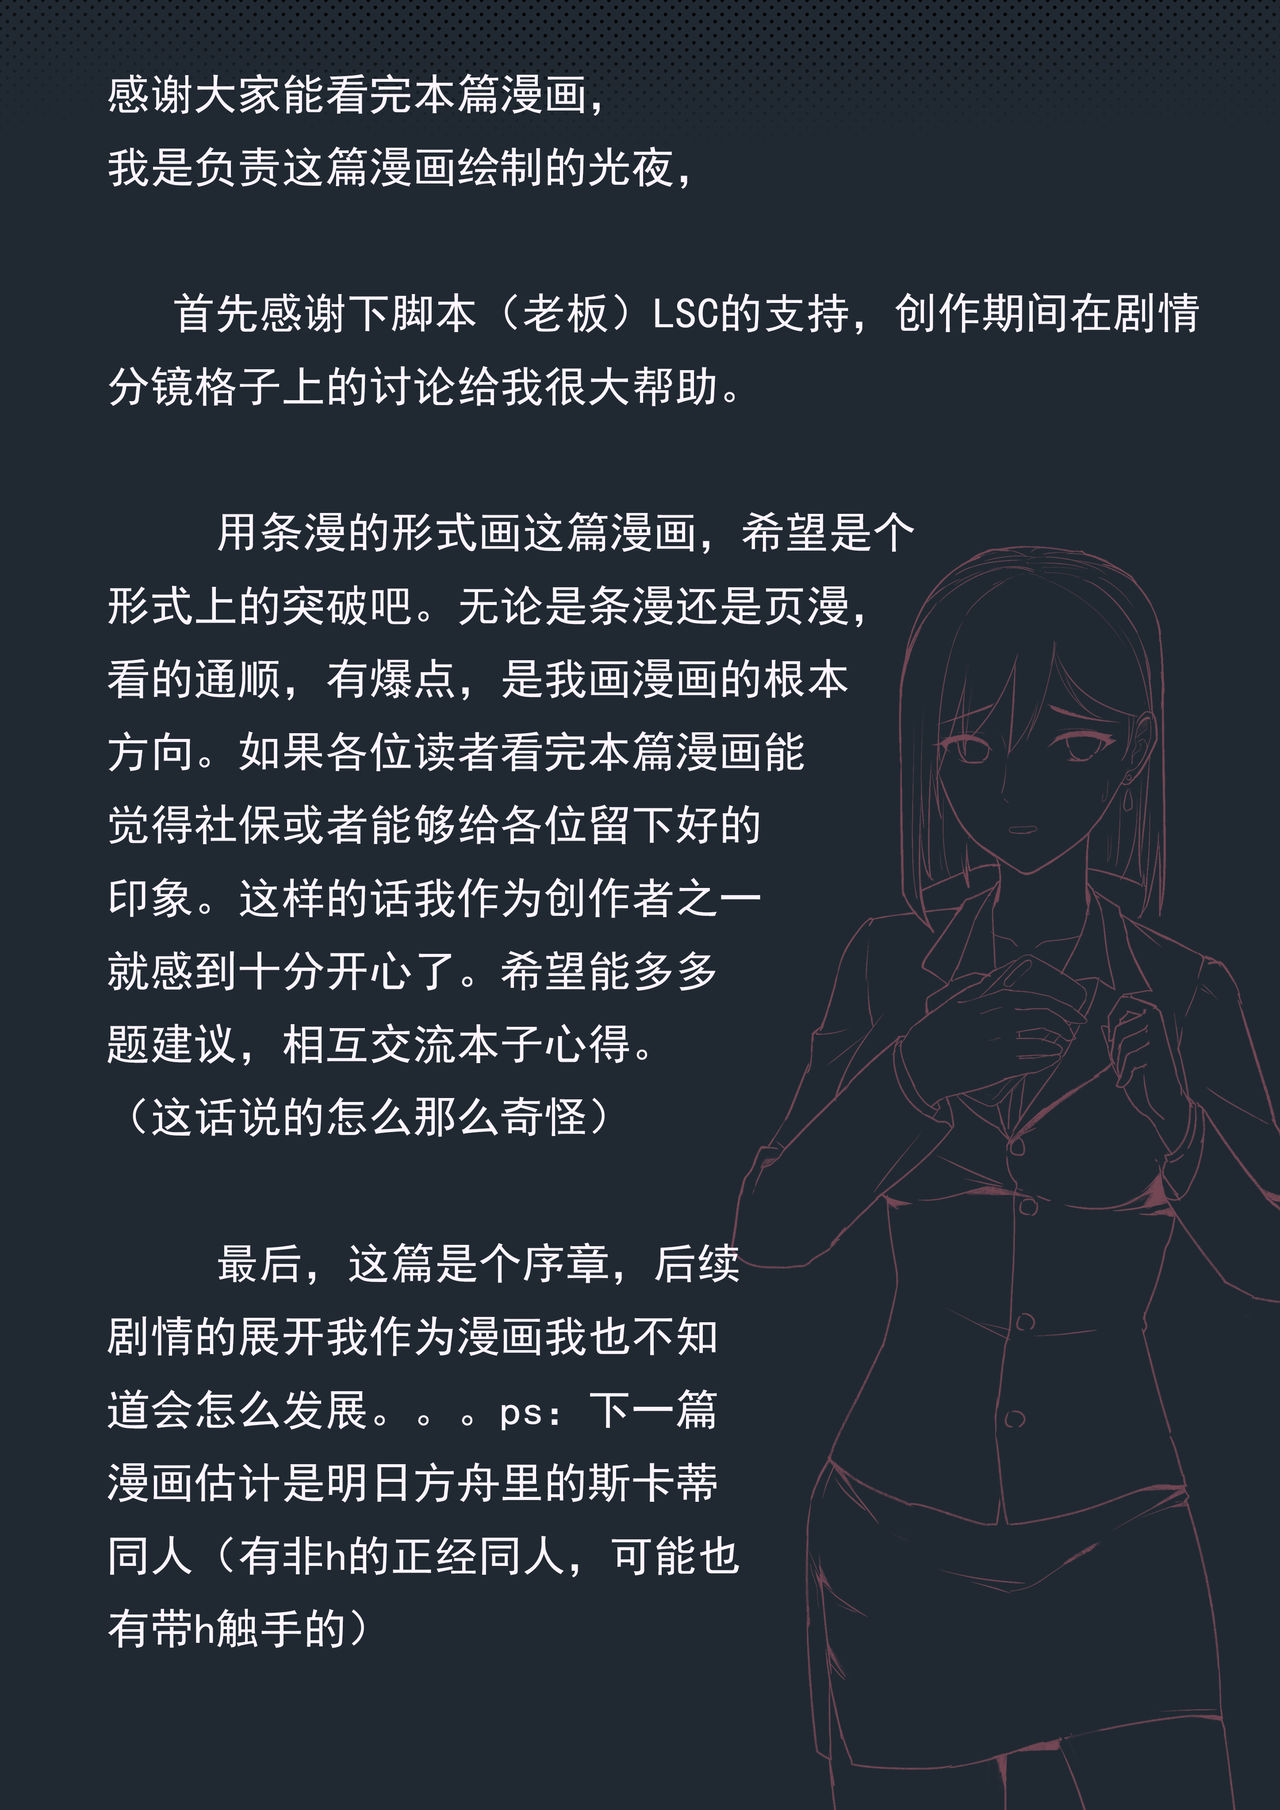 [7T-黑夜的光] 寄生之恋 Tentacle love [Chinese] page 13 full